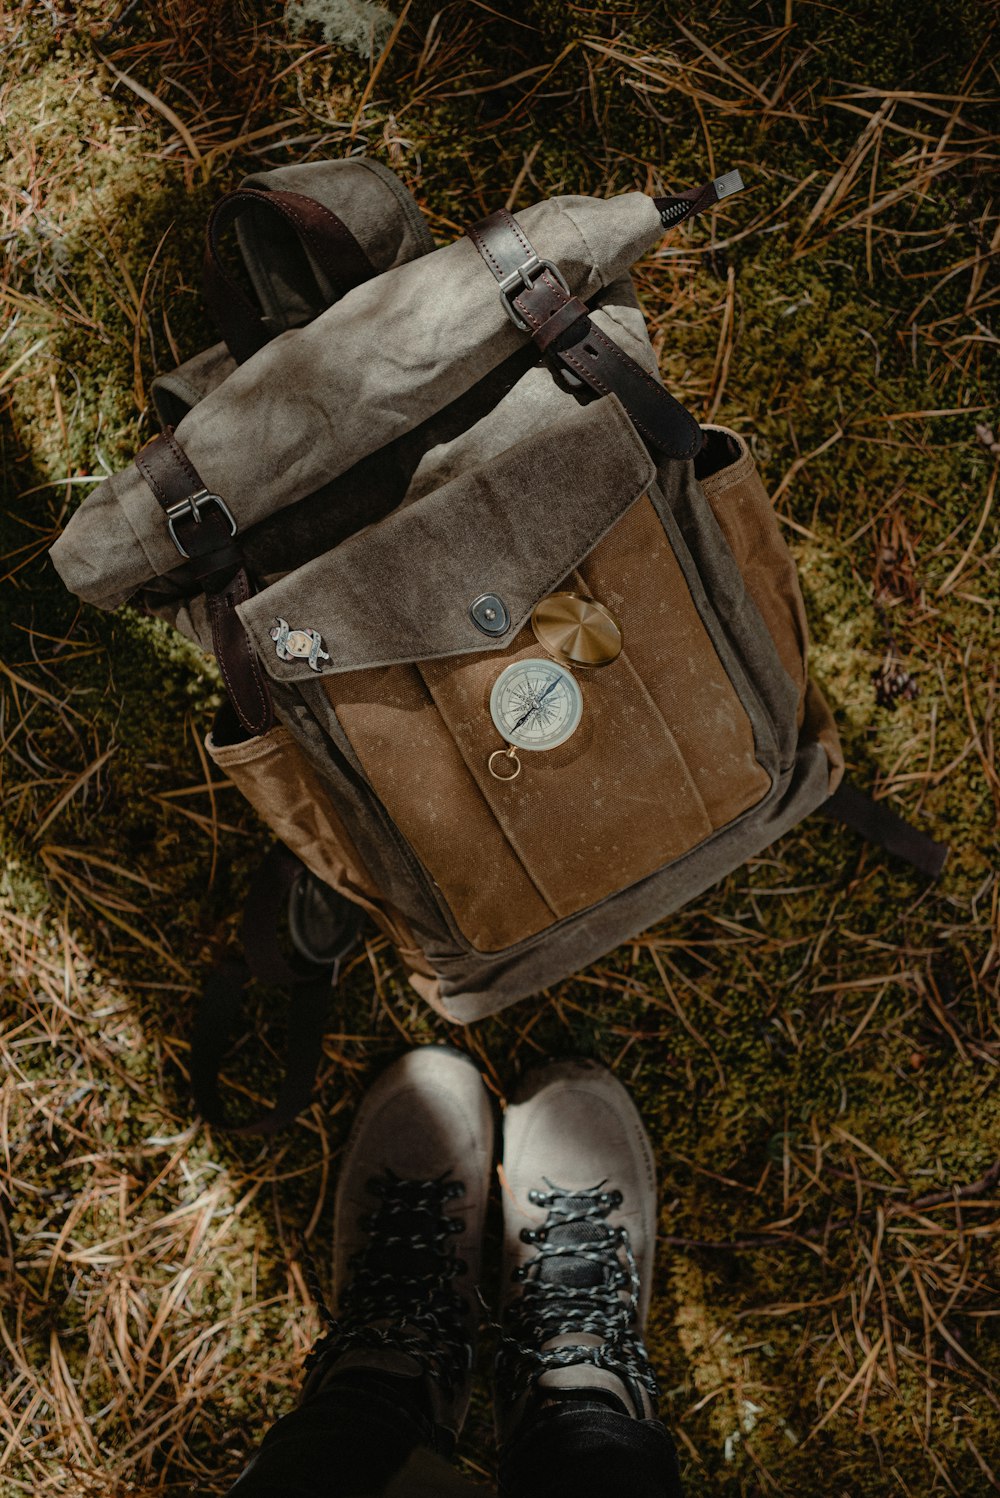 a person standing in the grass with a backpack